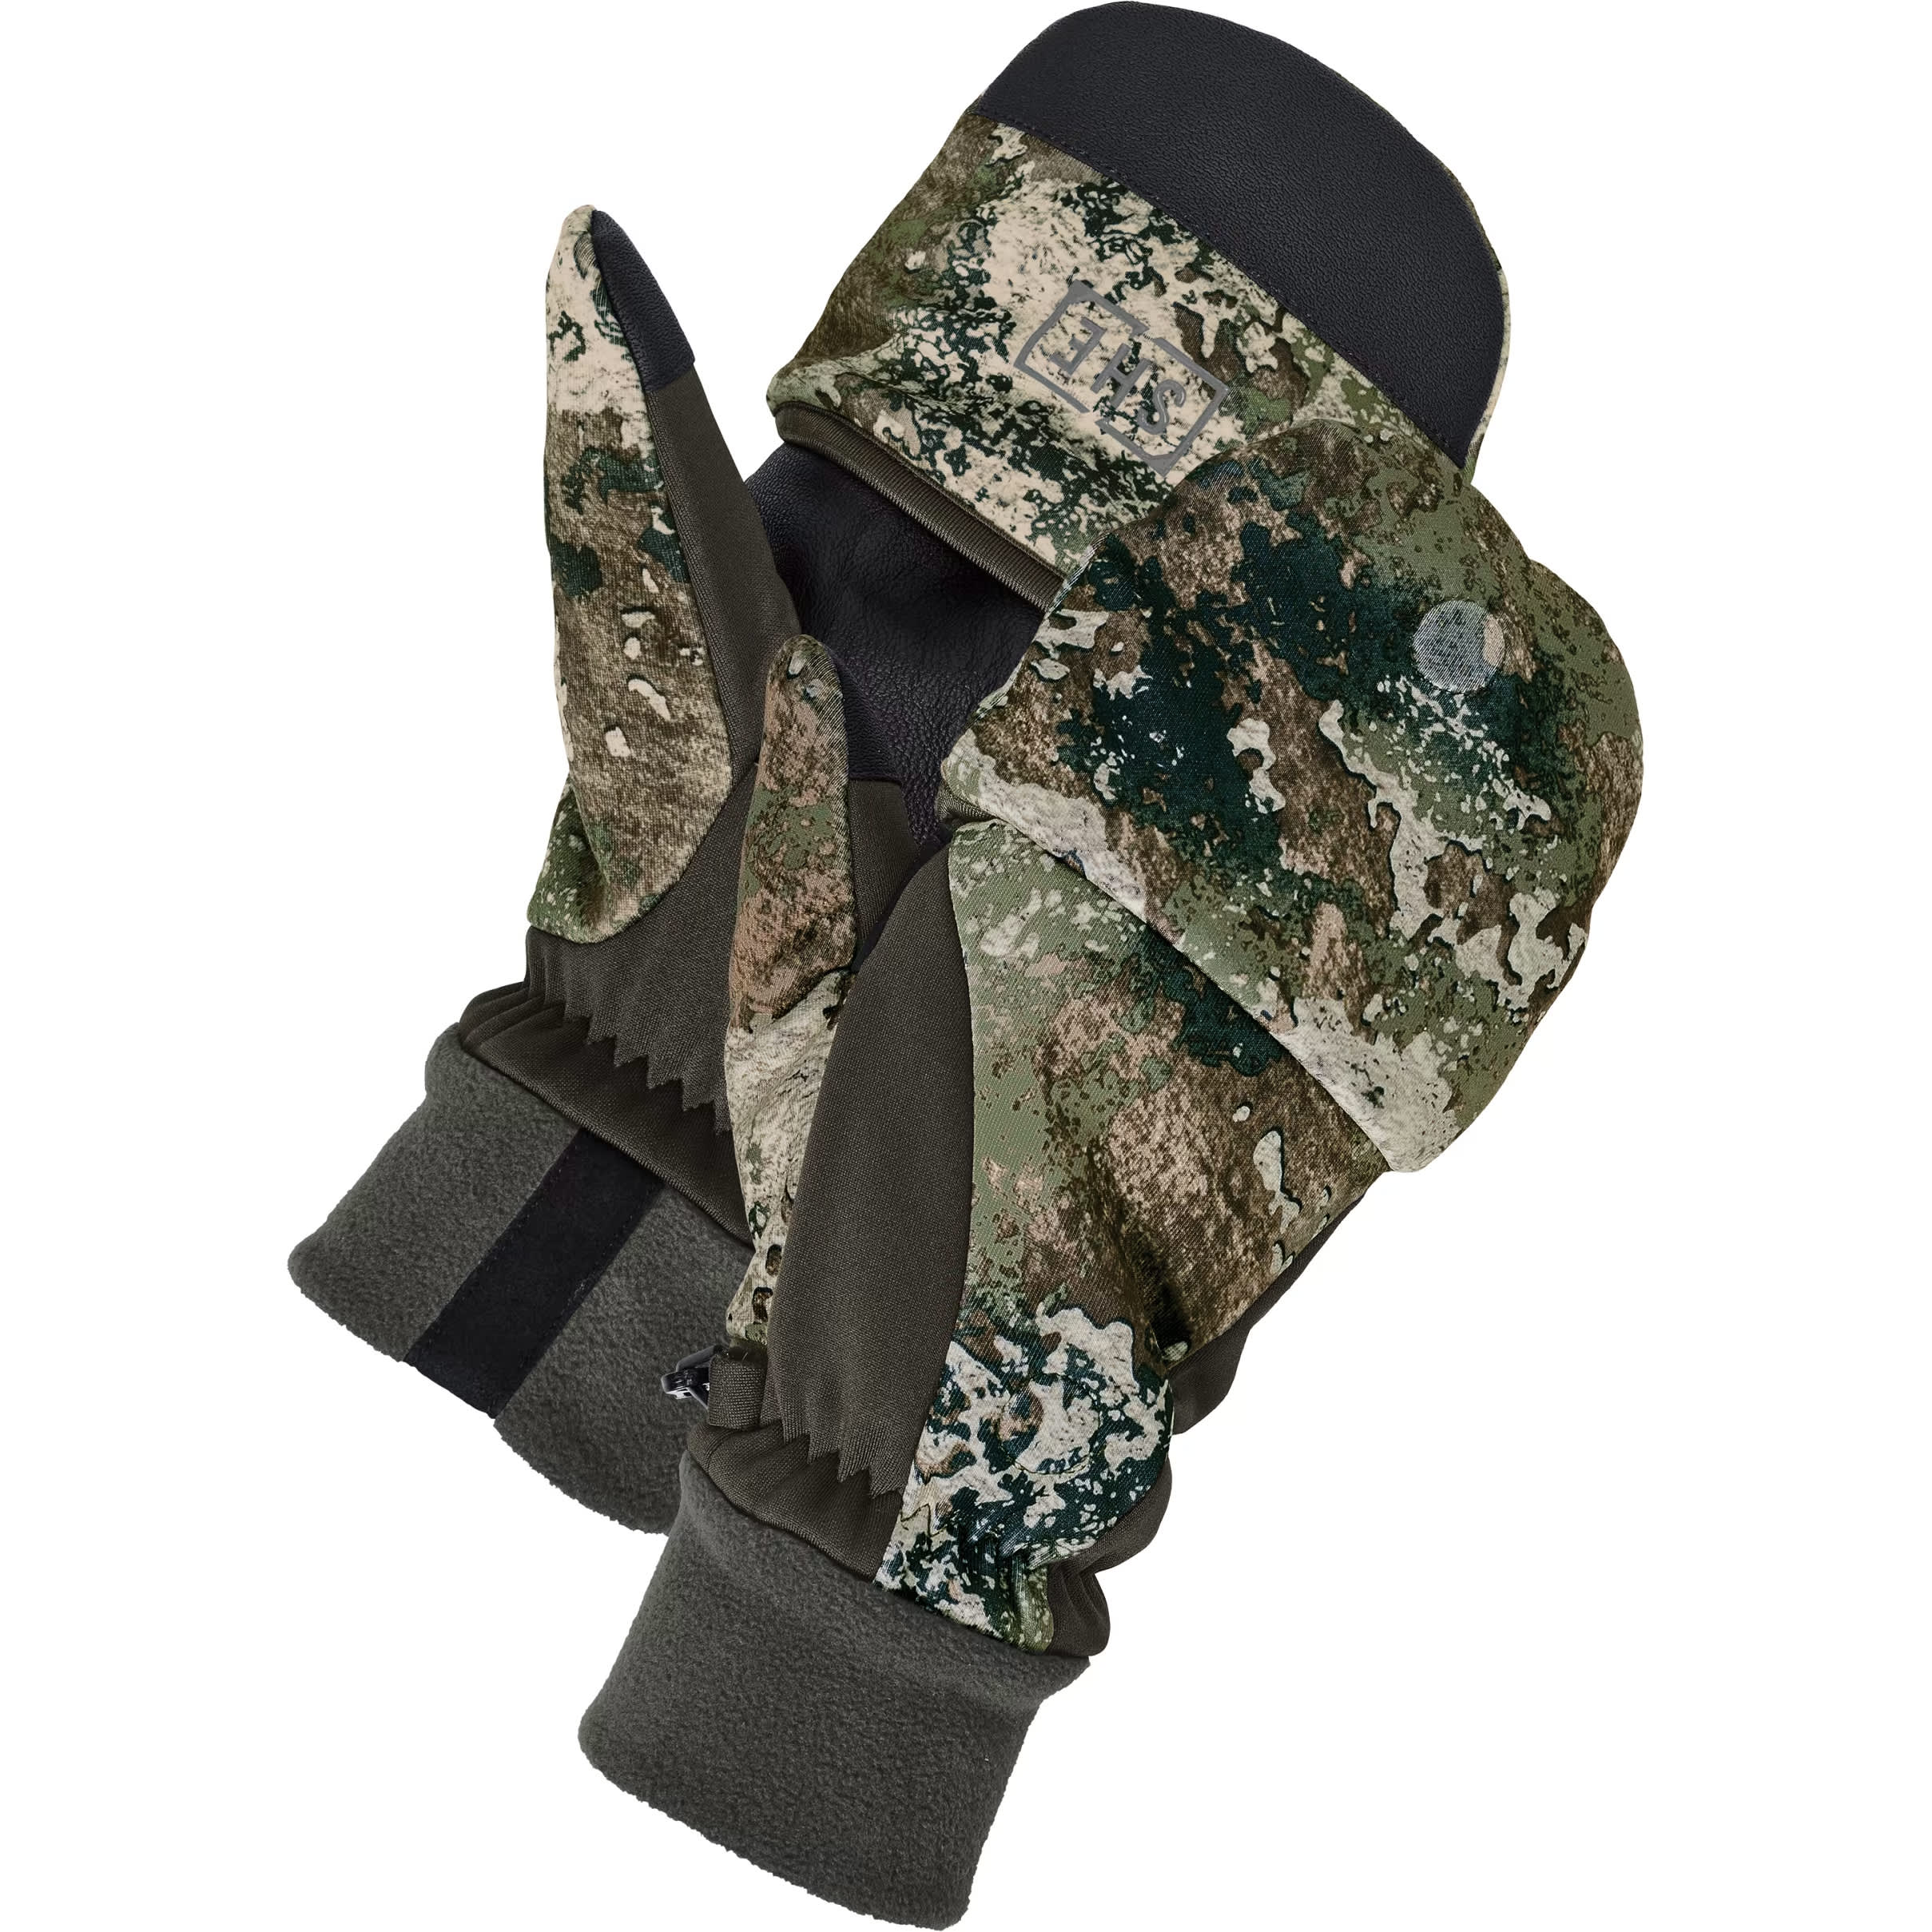 Women's Hunting Gloves & Accessories